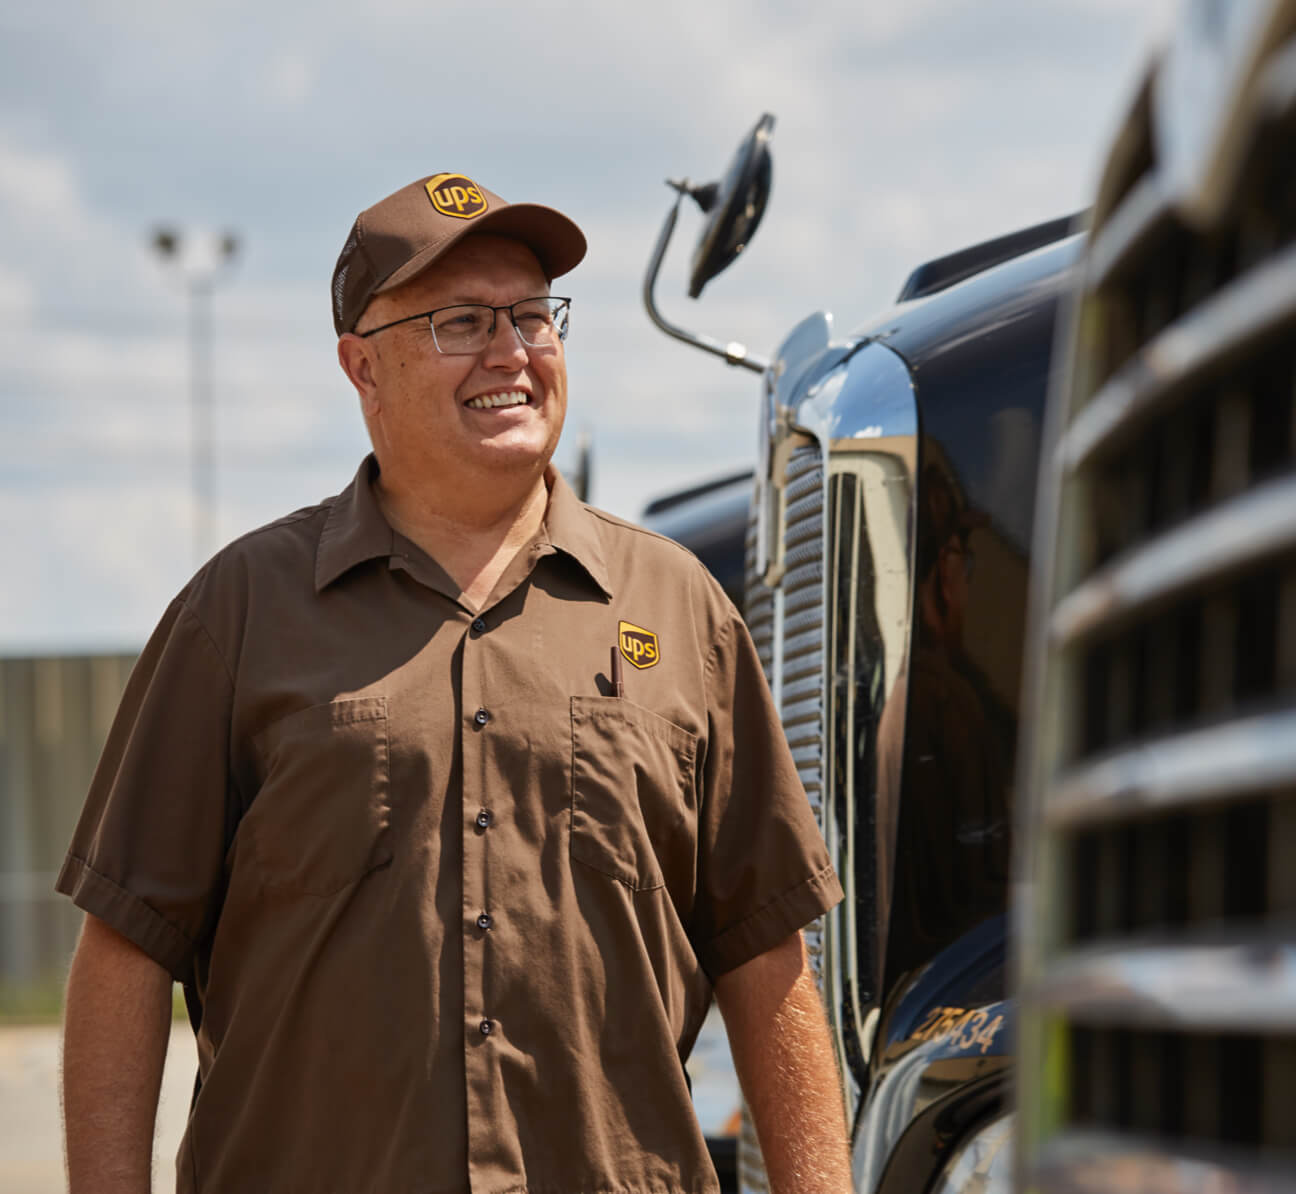 Male tractor trailer driver smiling next to semi cabs